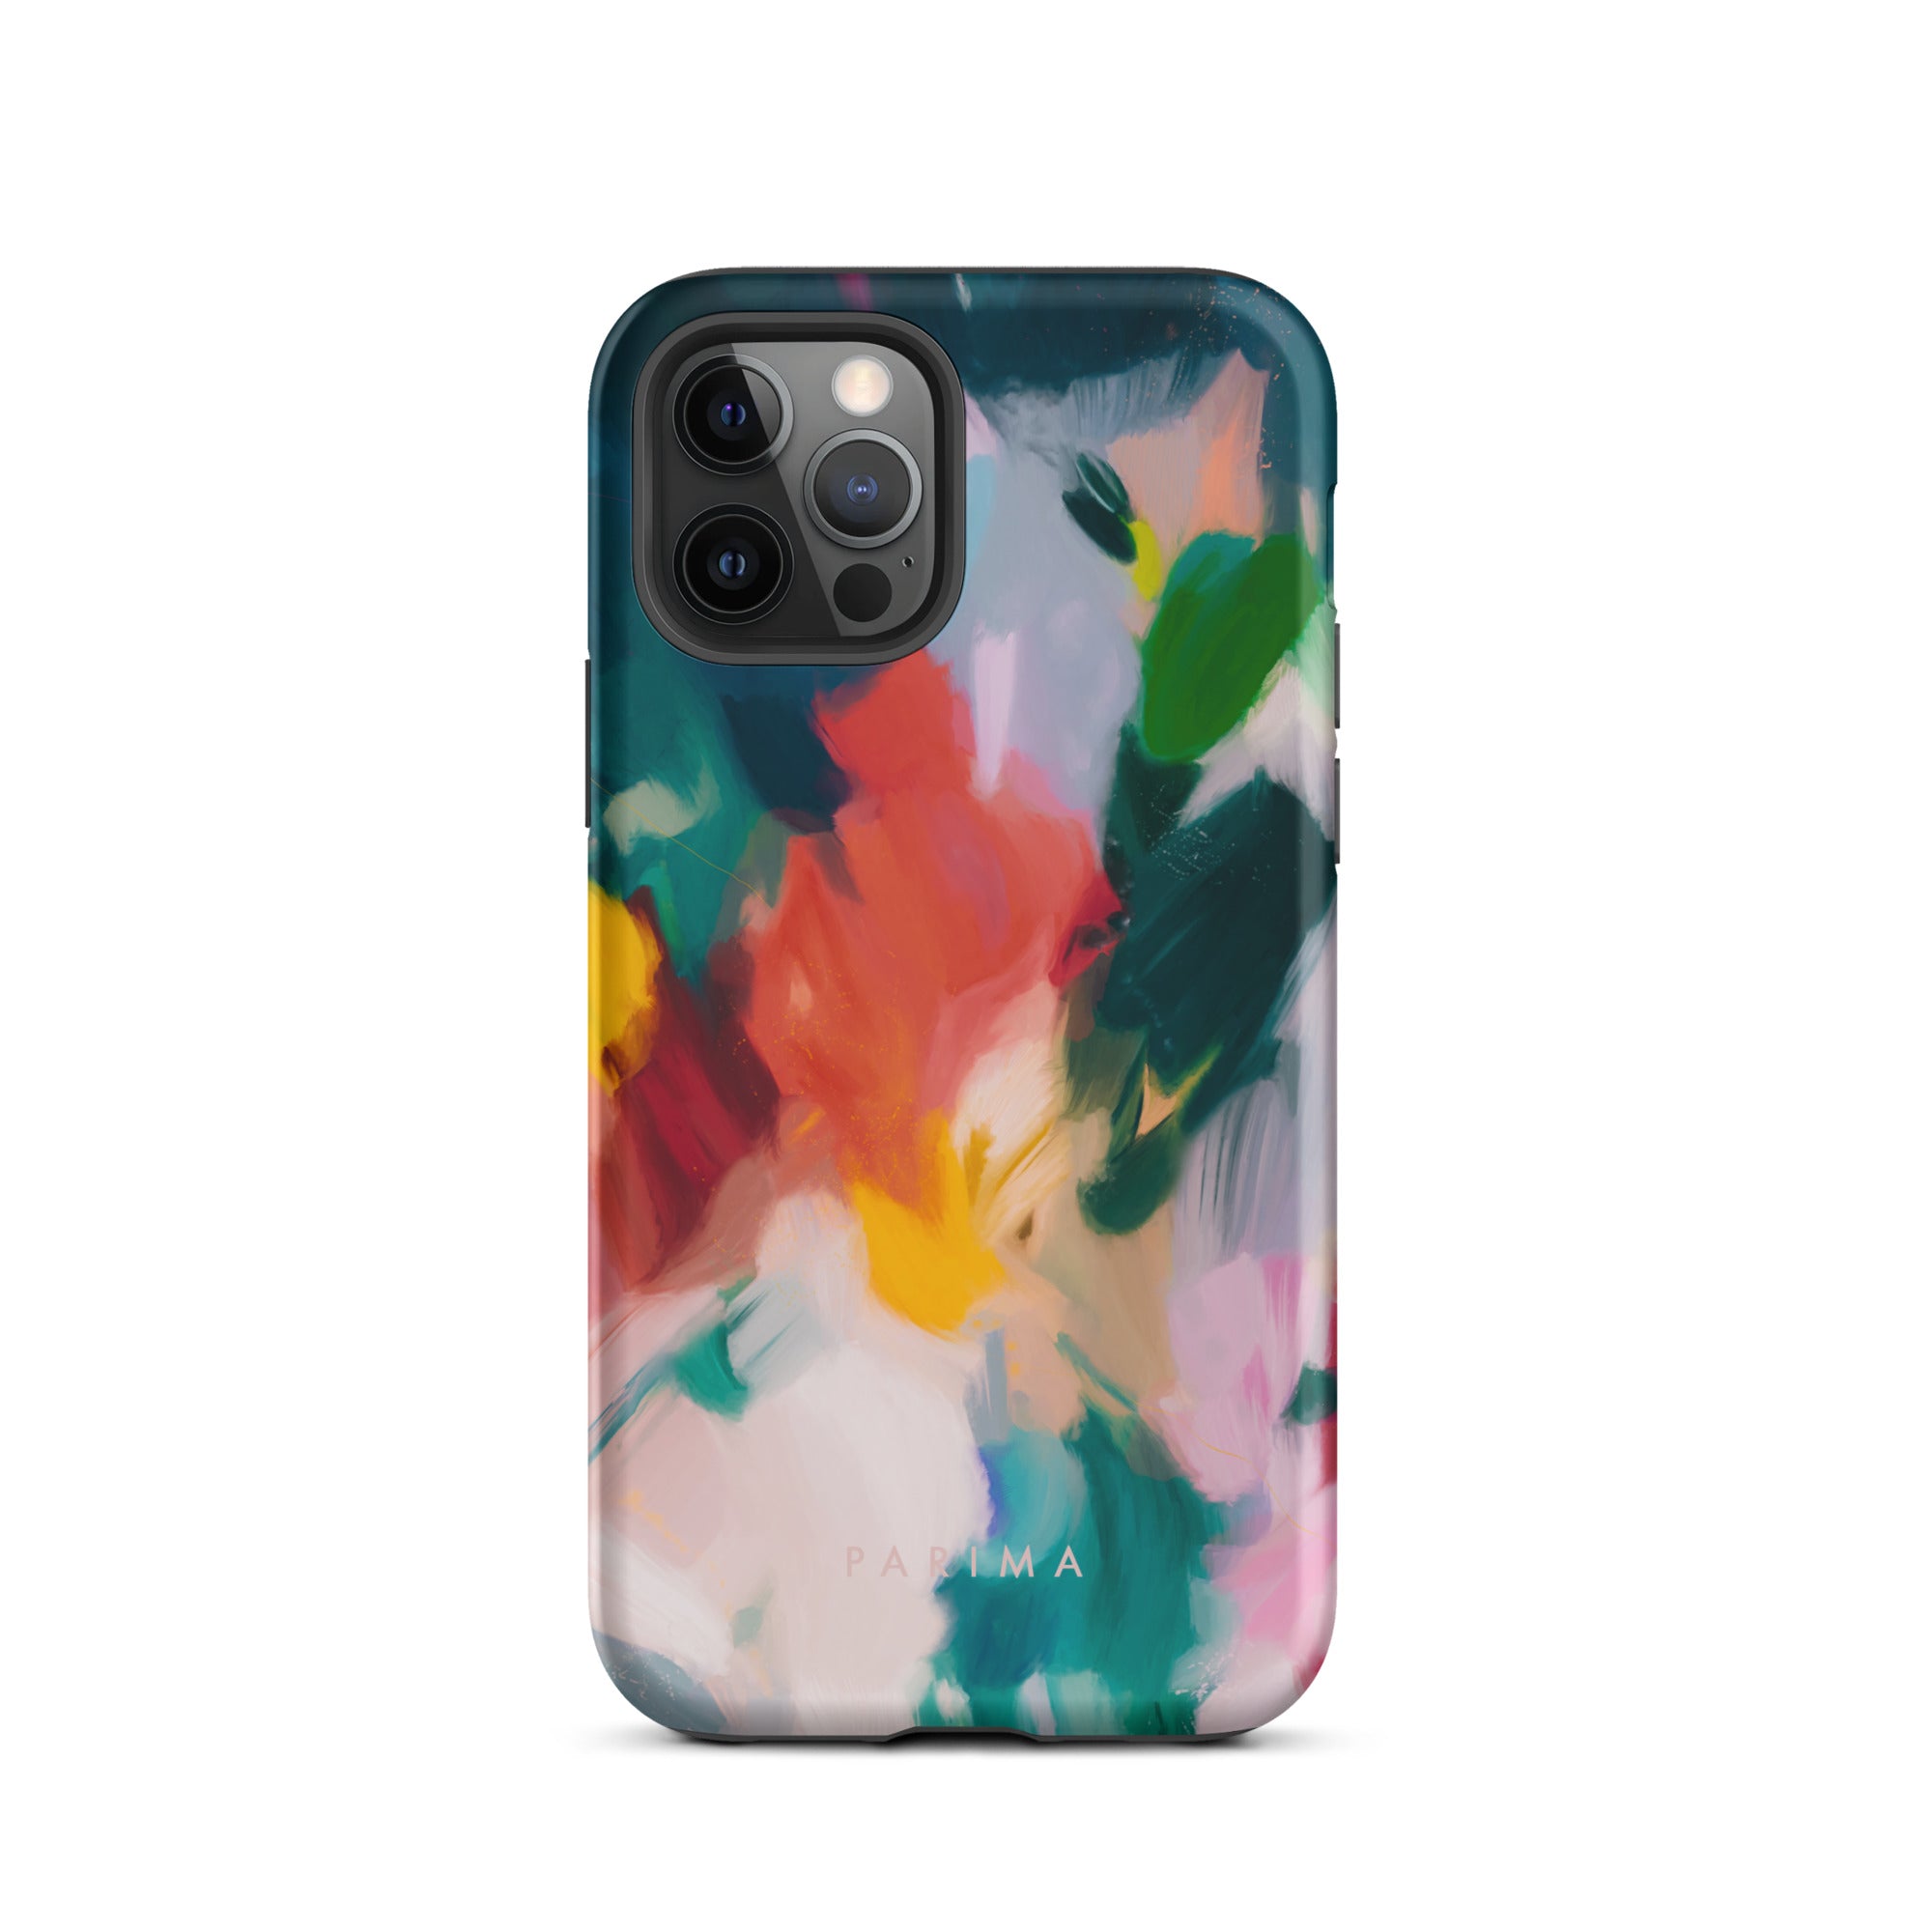 Pomme, blue and red abstract art on iPhone 12 Pro tough case by Parima Studio